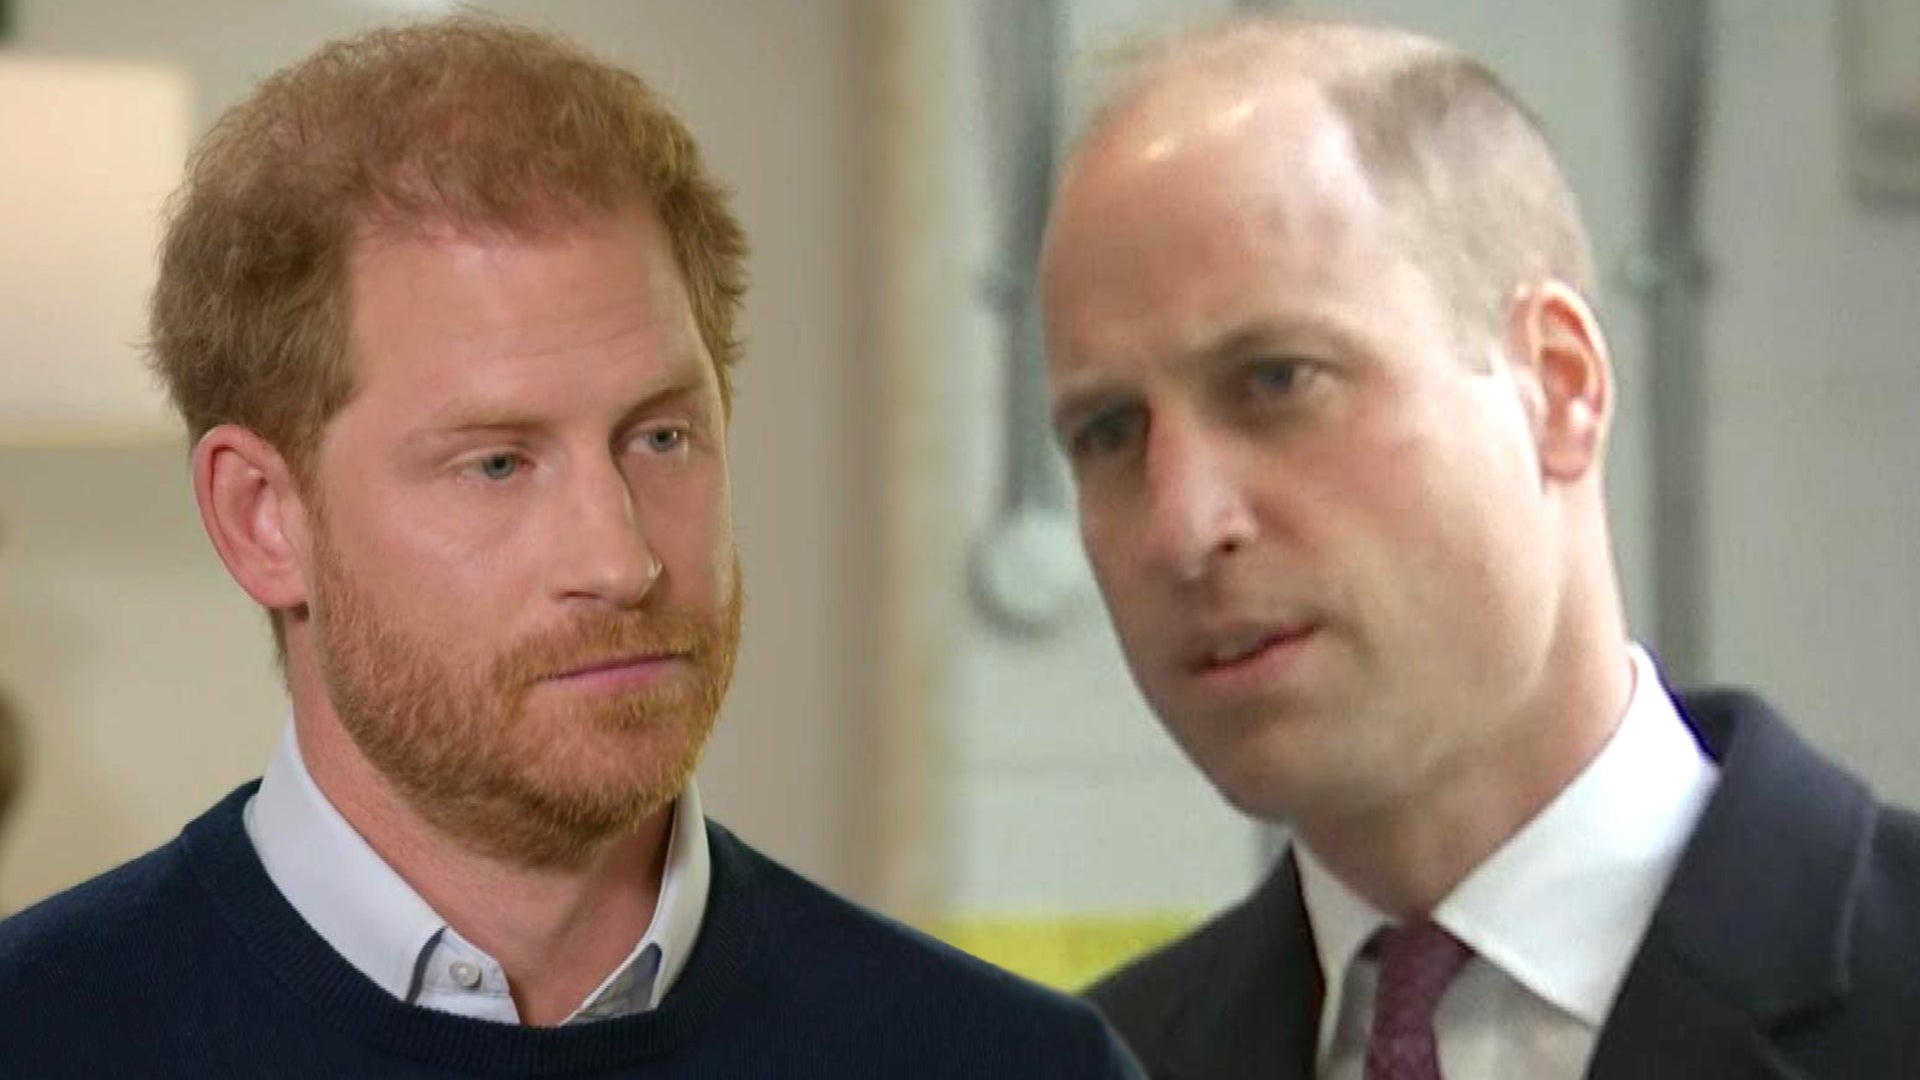 Prince William ‘Furious’ Over Prince Harry’s ‘Spare’ Press Interviews (Source)